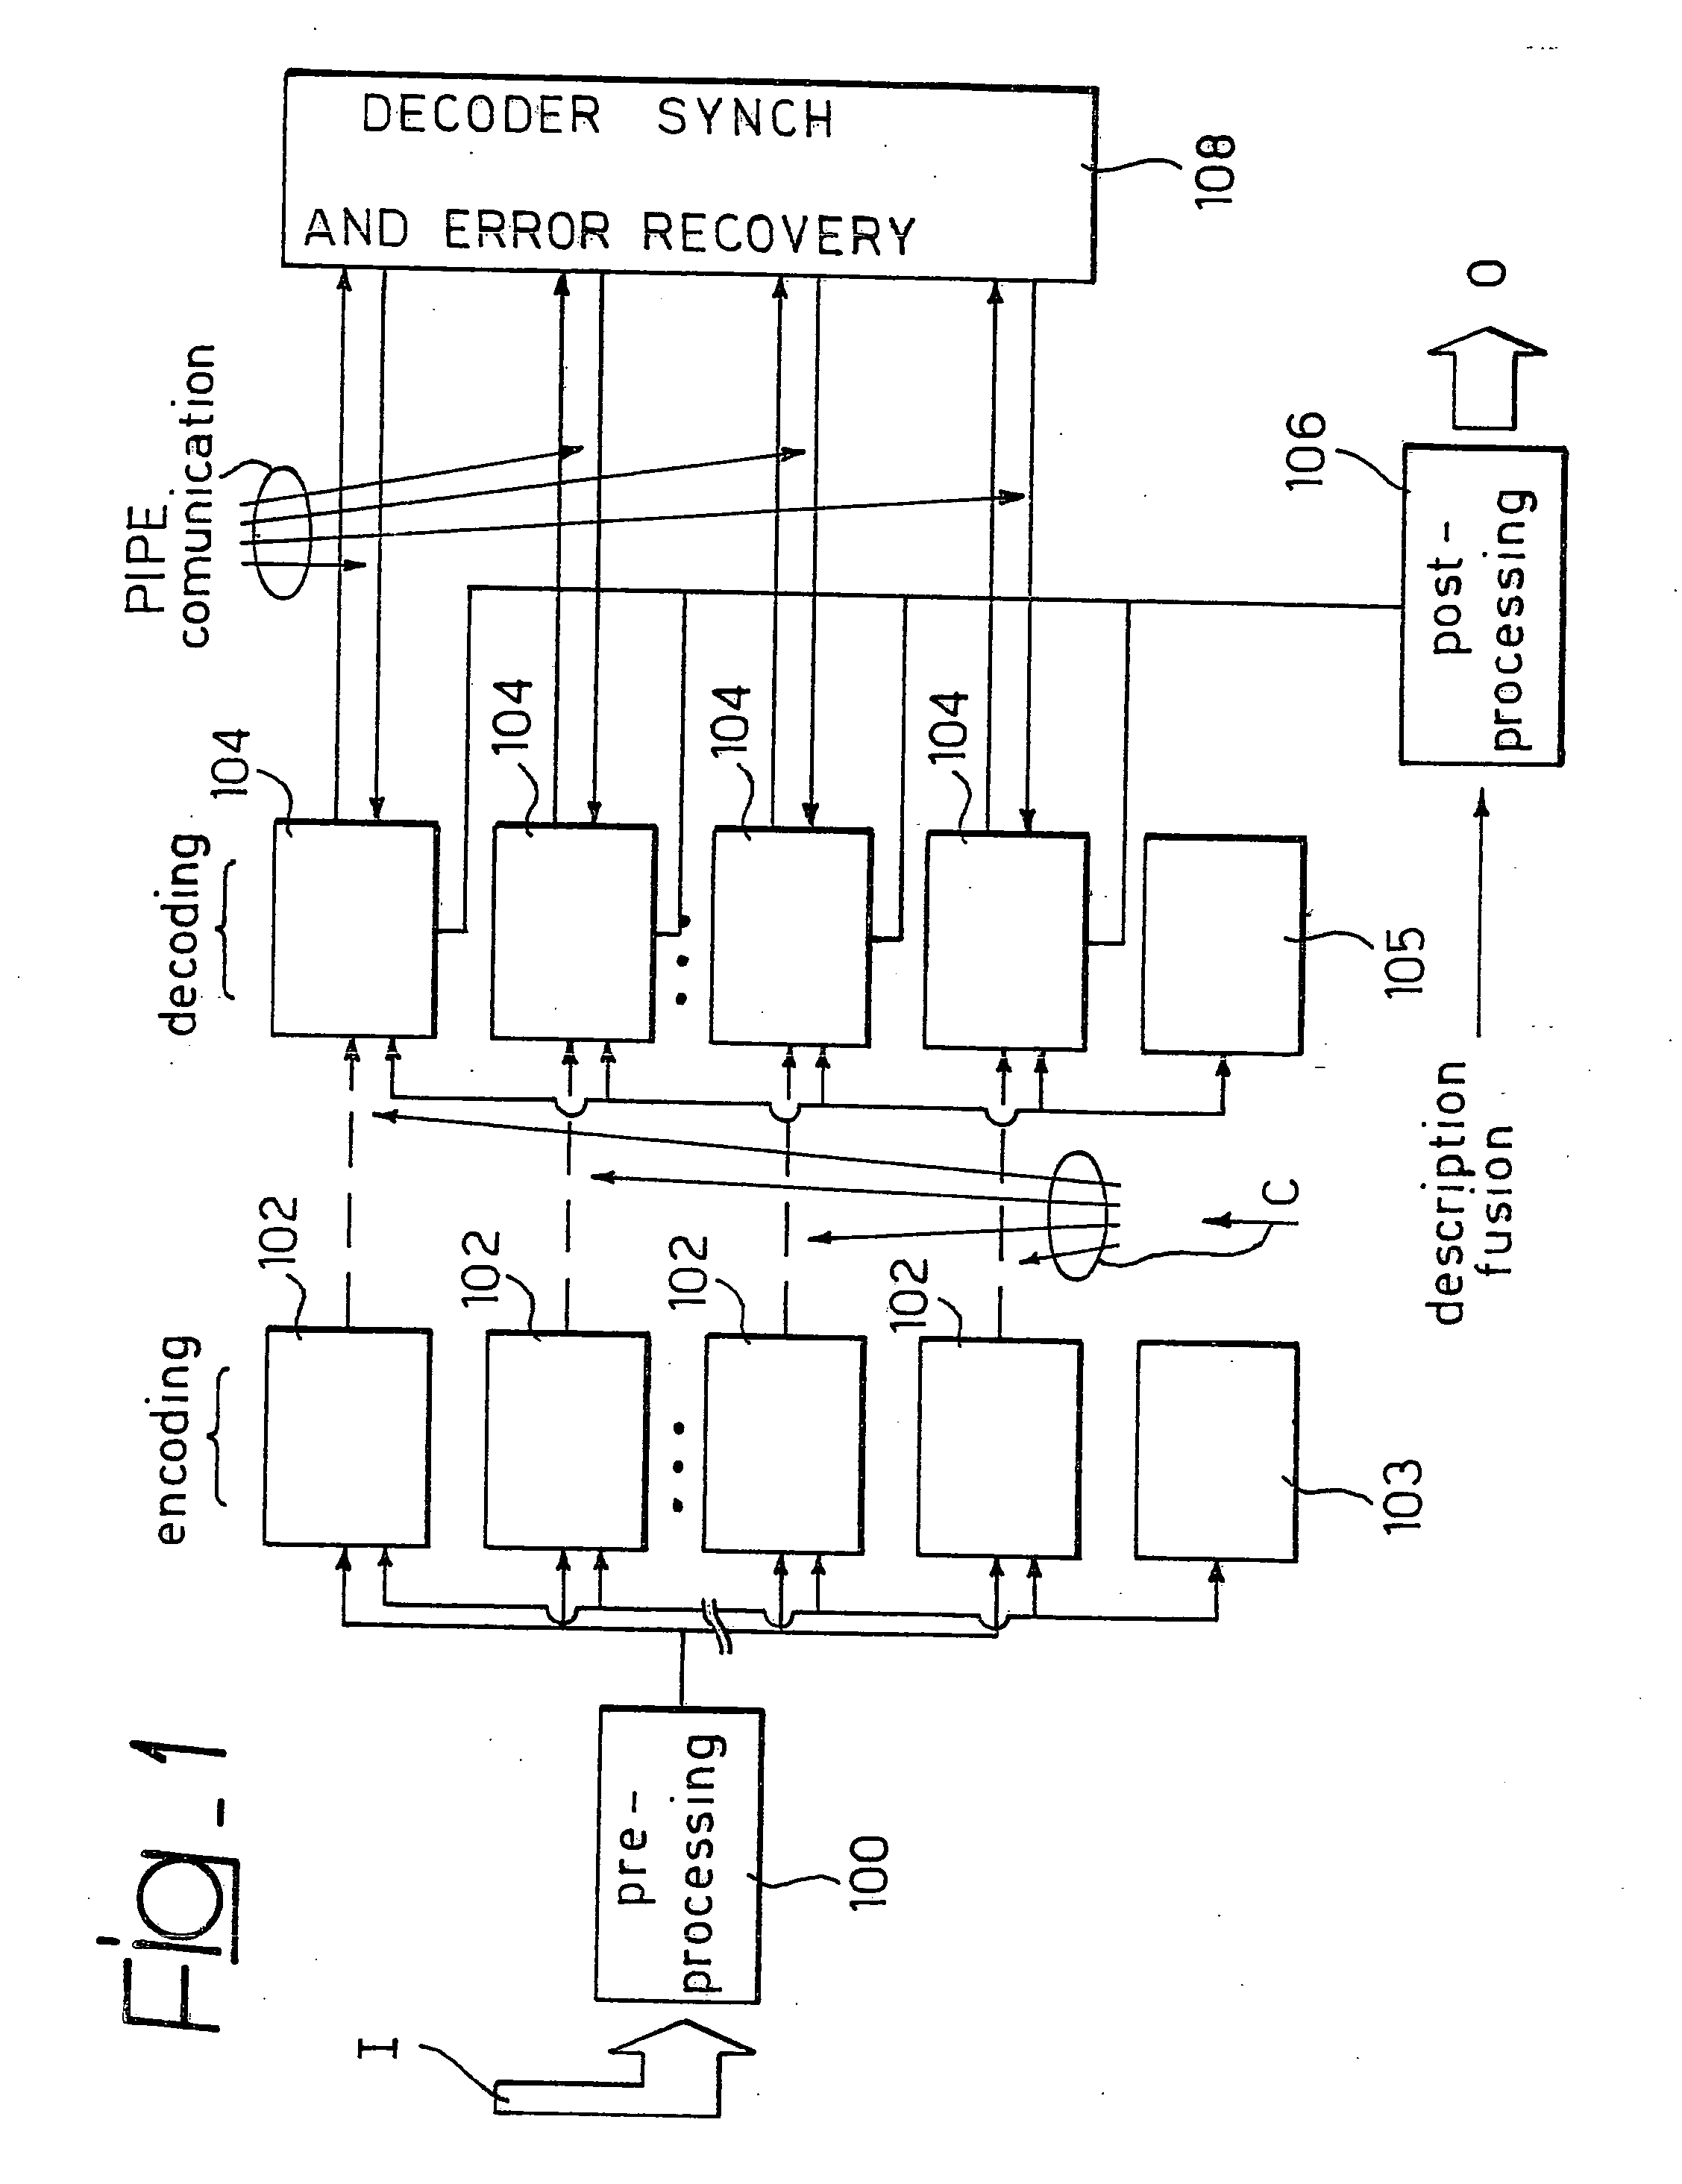 Encoding/decoding methods and systems, computer program products therefor